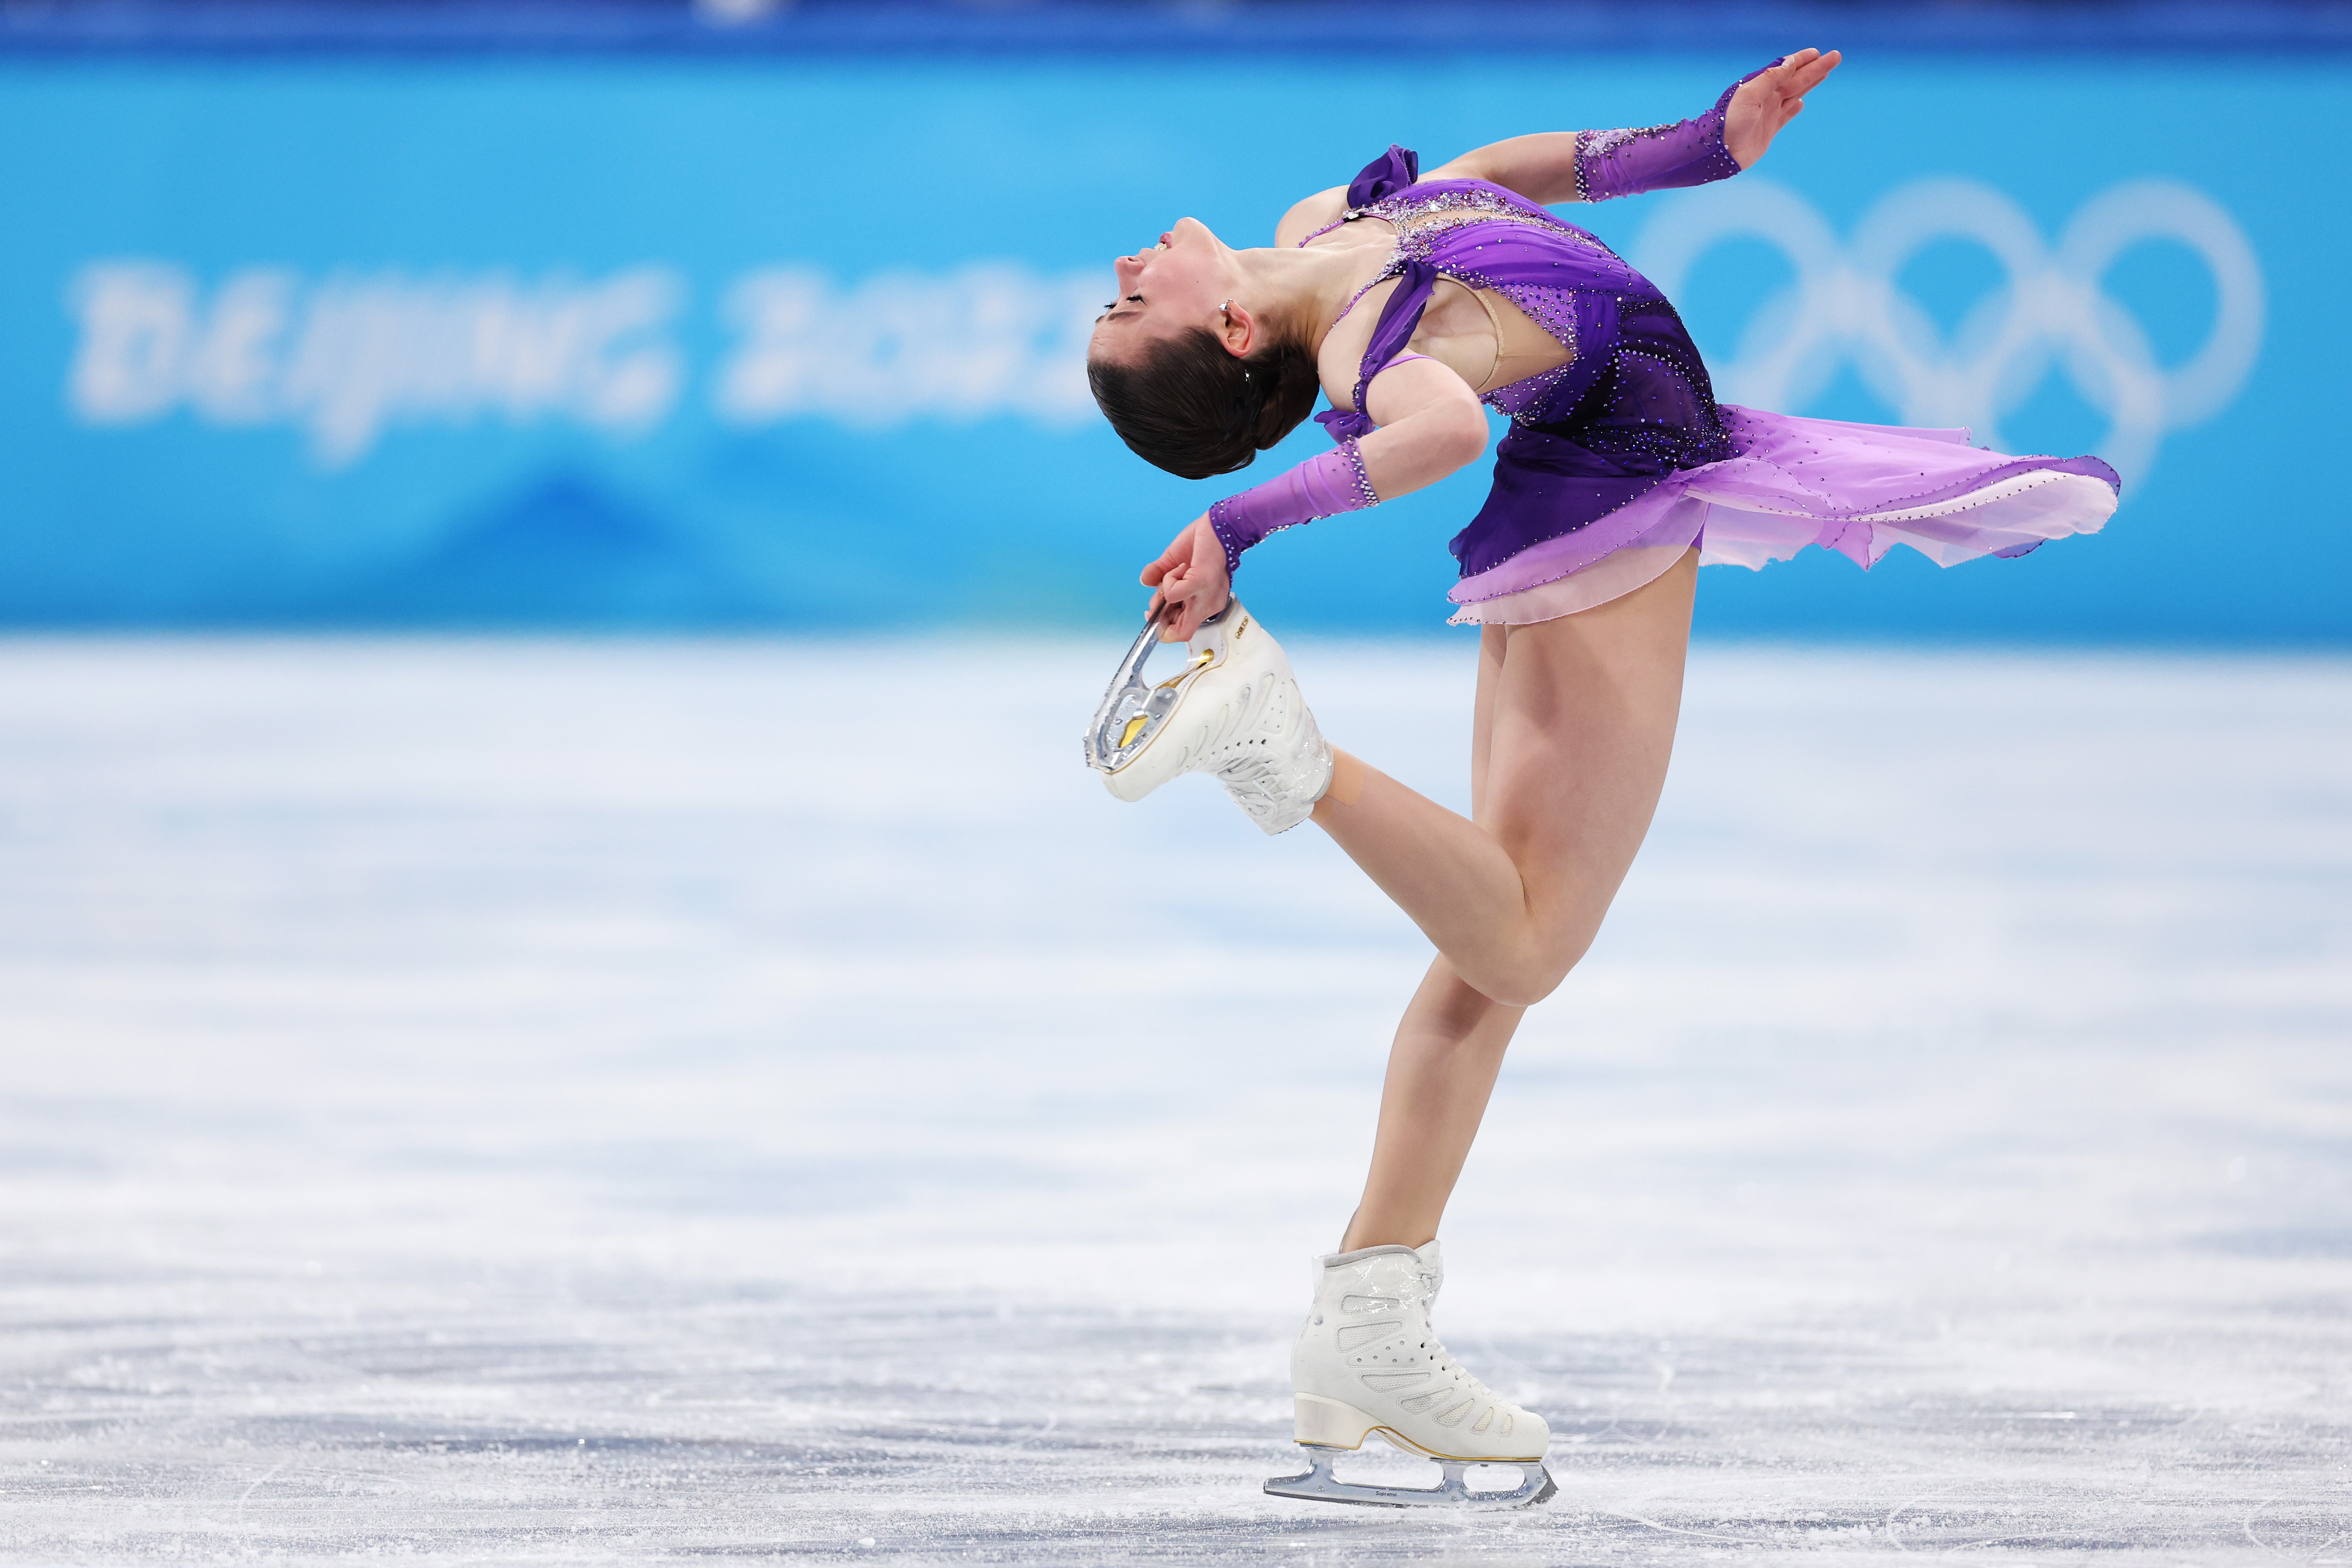 Miss Watching Womens Figure Skating Short Program Live? How to Watch it Again